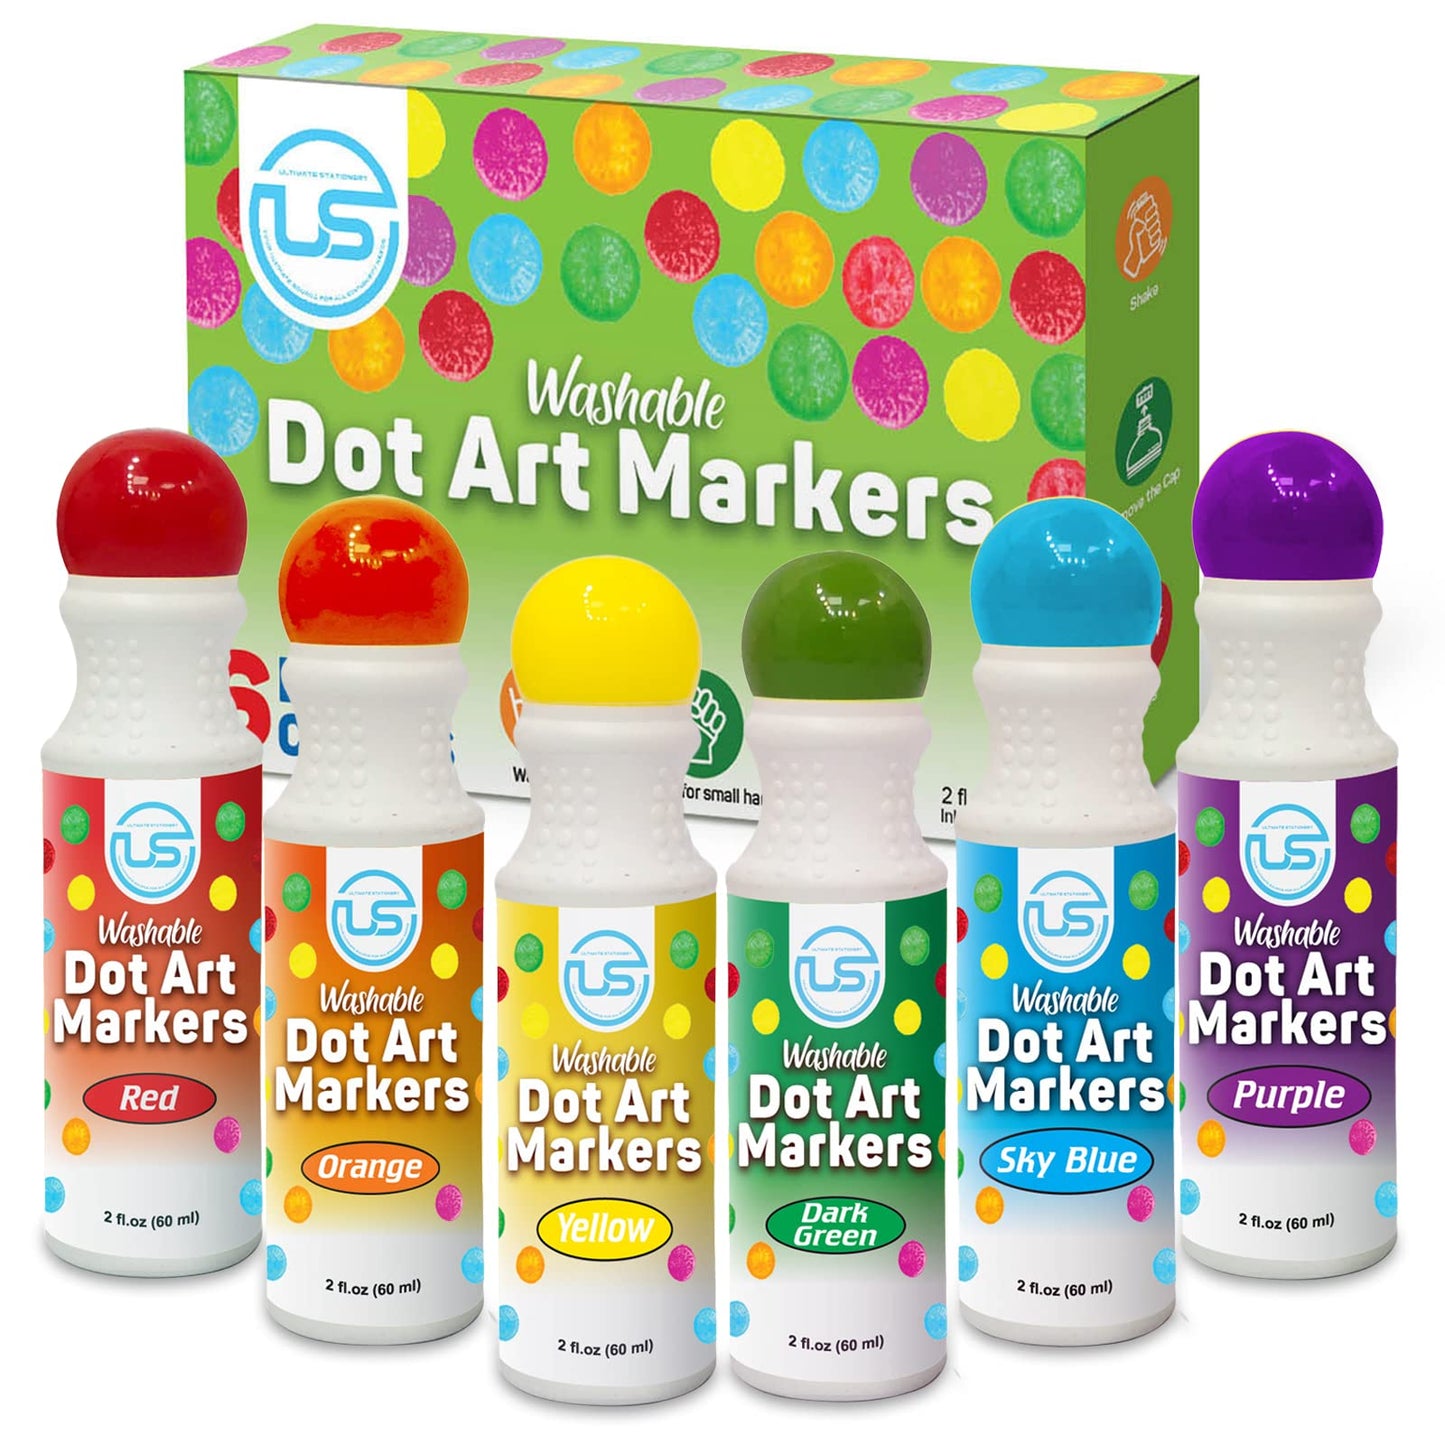 Ultimate Stationery Dot Markers | Bingo Daubers | Washable 6 Colors Dot Markers for Toddlers and Kids Dot Art. Toddler arts and crafts